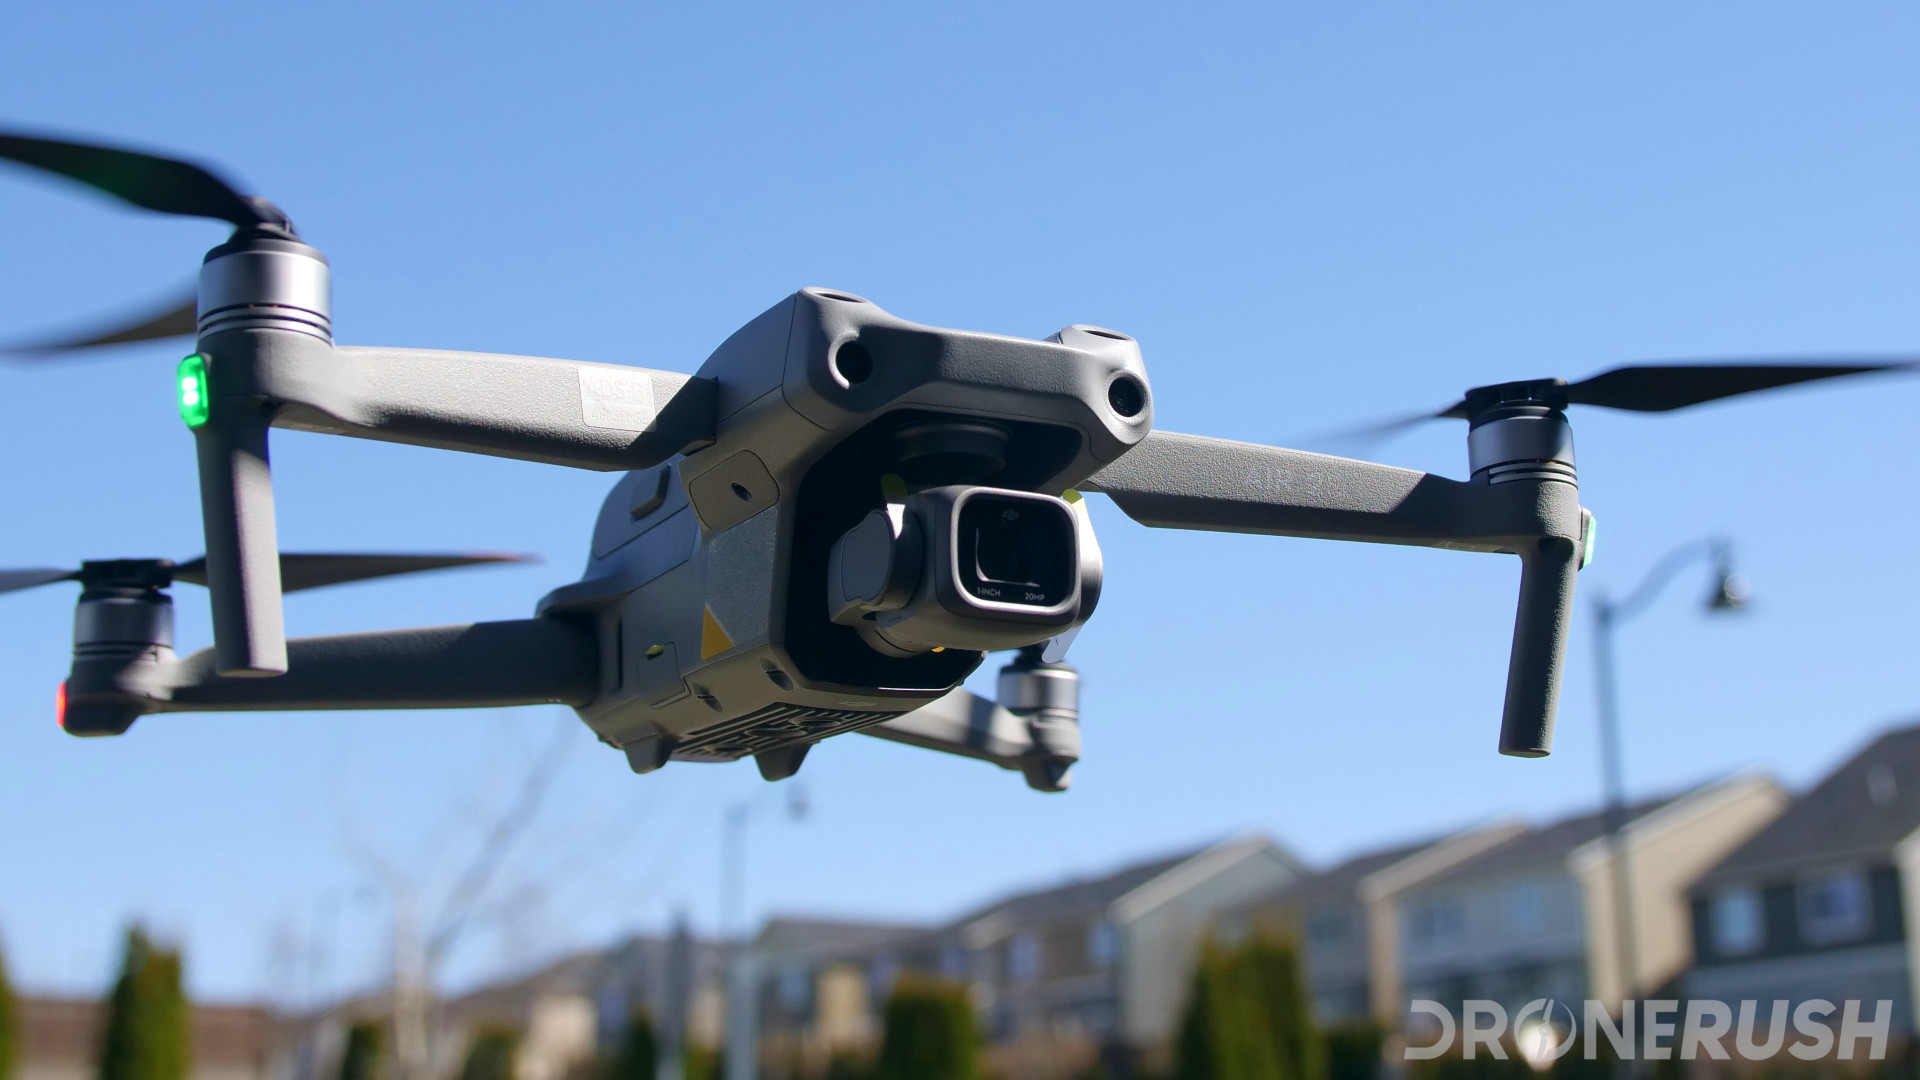 Drone Rush Drone Rush is your source for news, reviews and on the best drones, UAV and other things that fly.